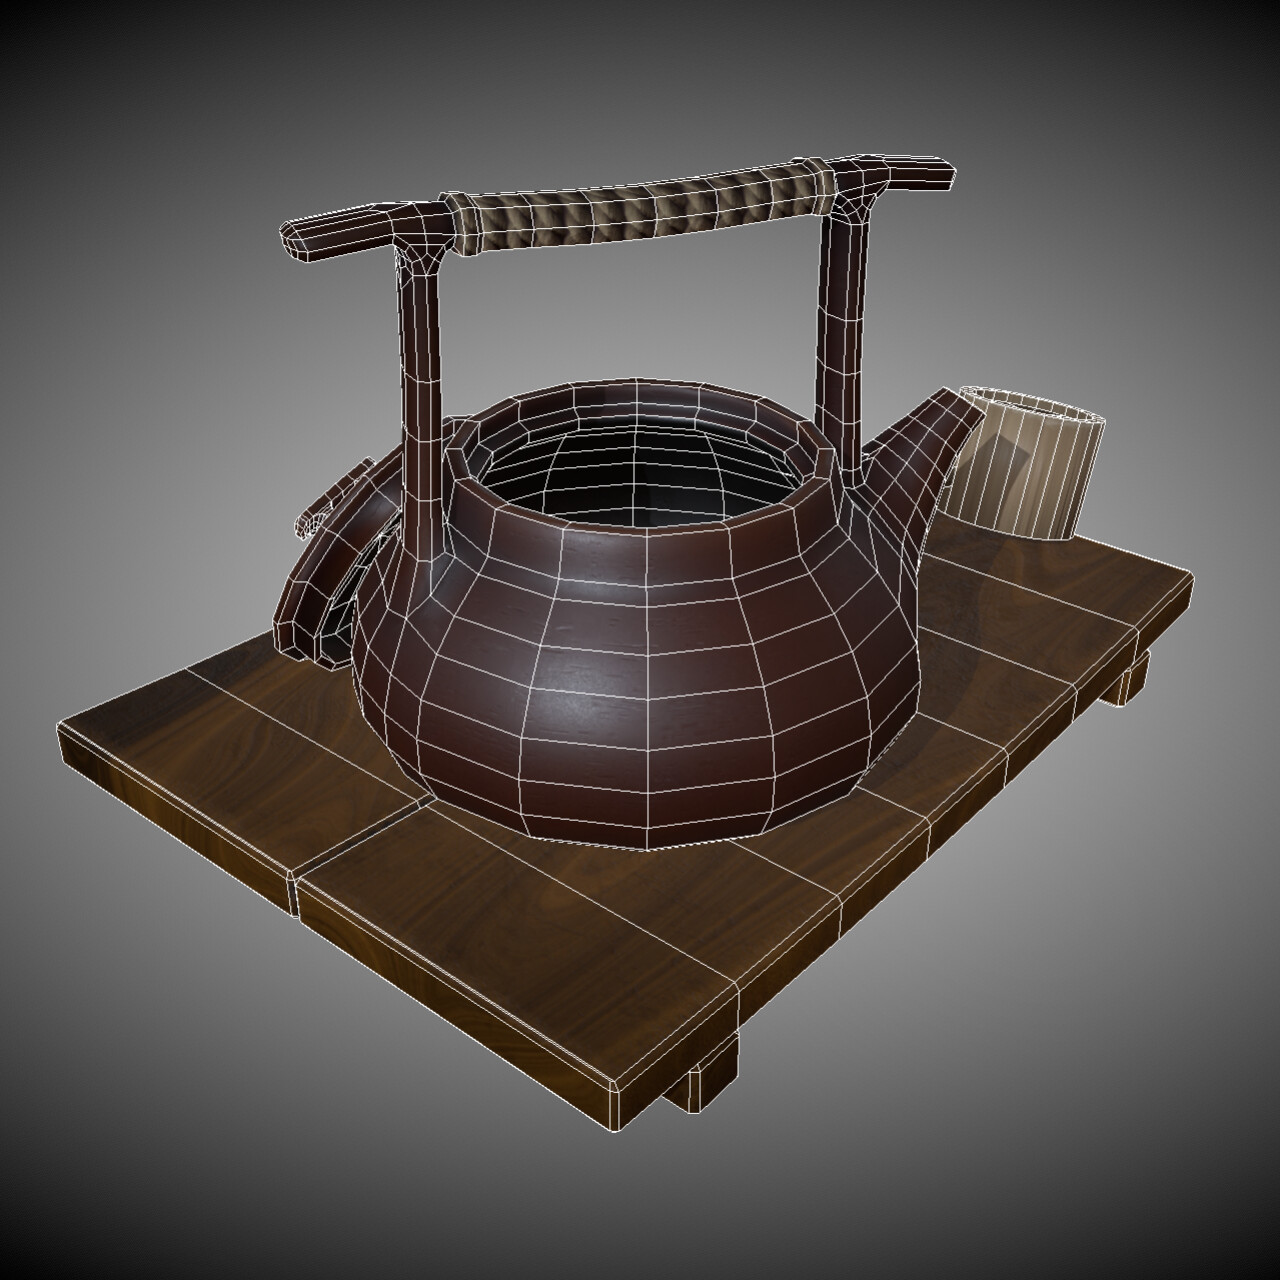 ArtStation - Clay teapot with some accessories | Resources